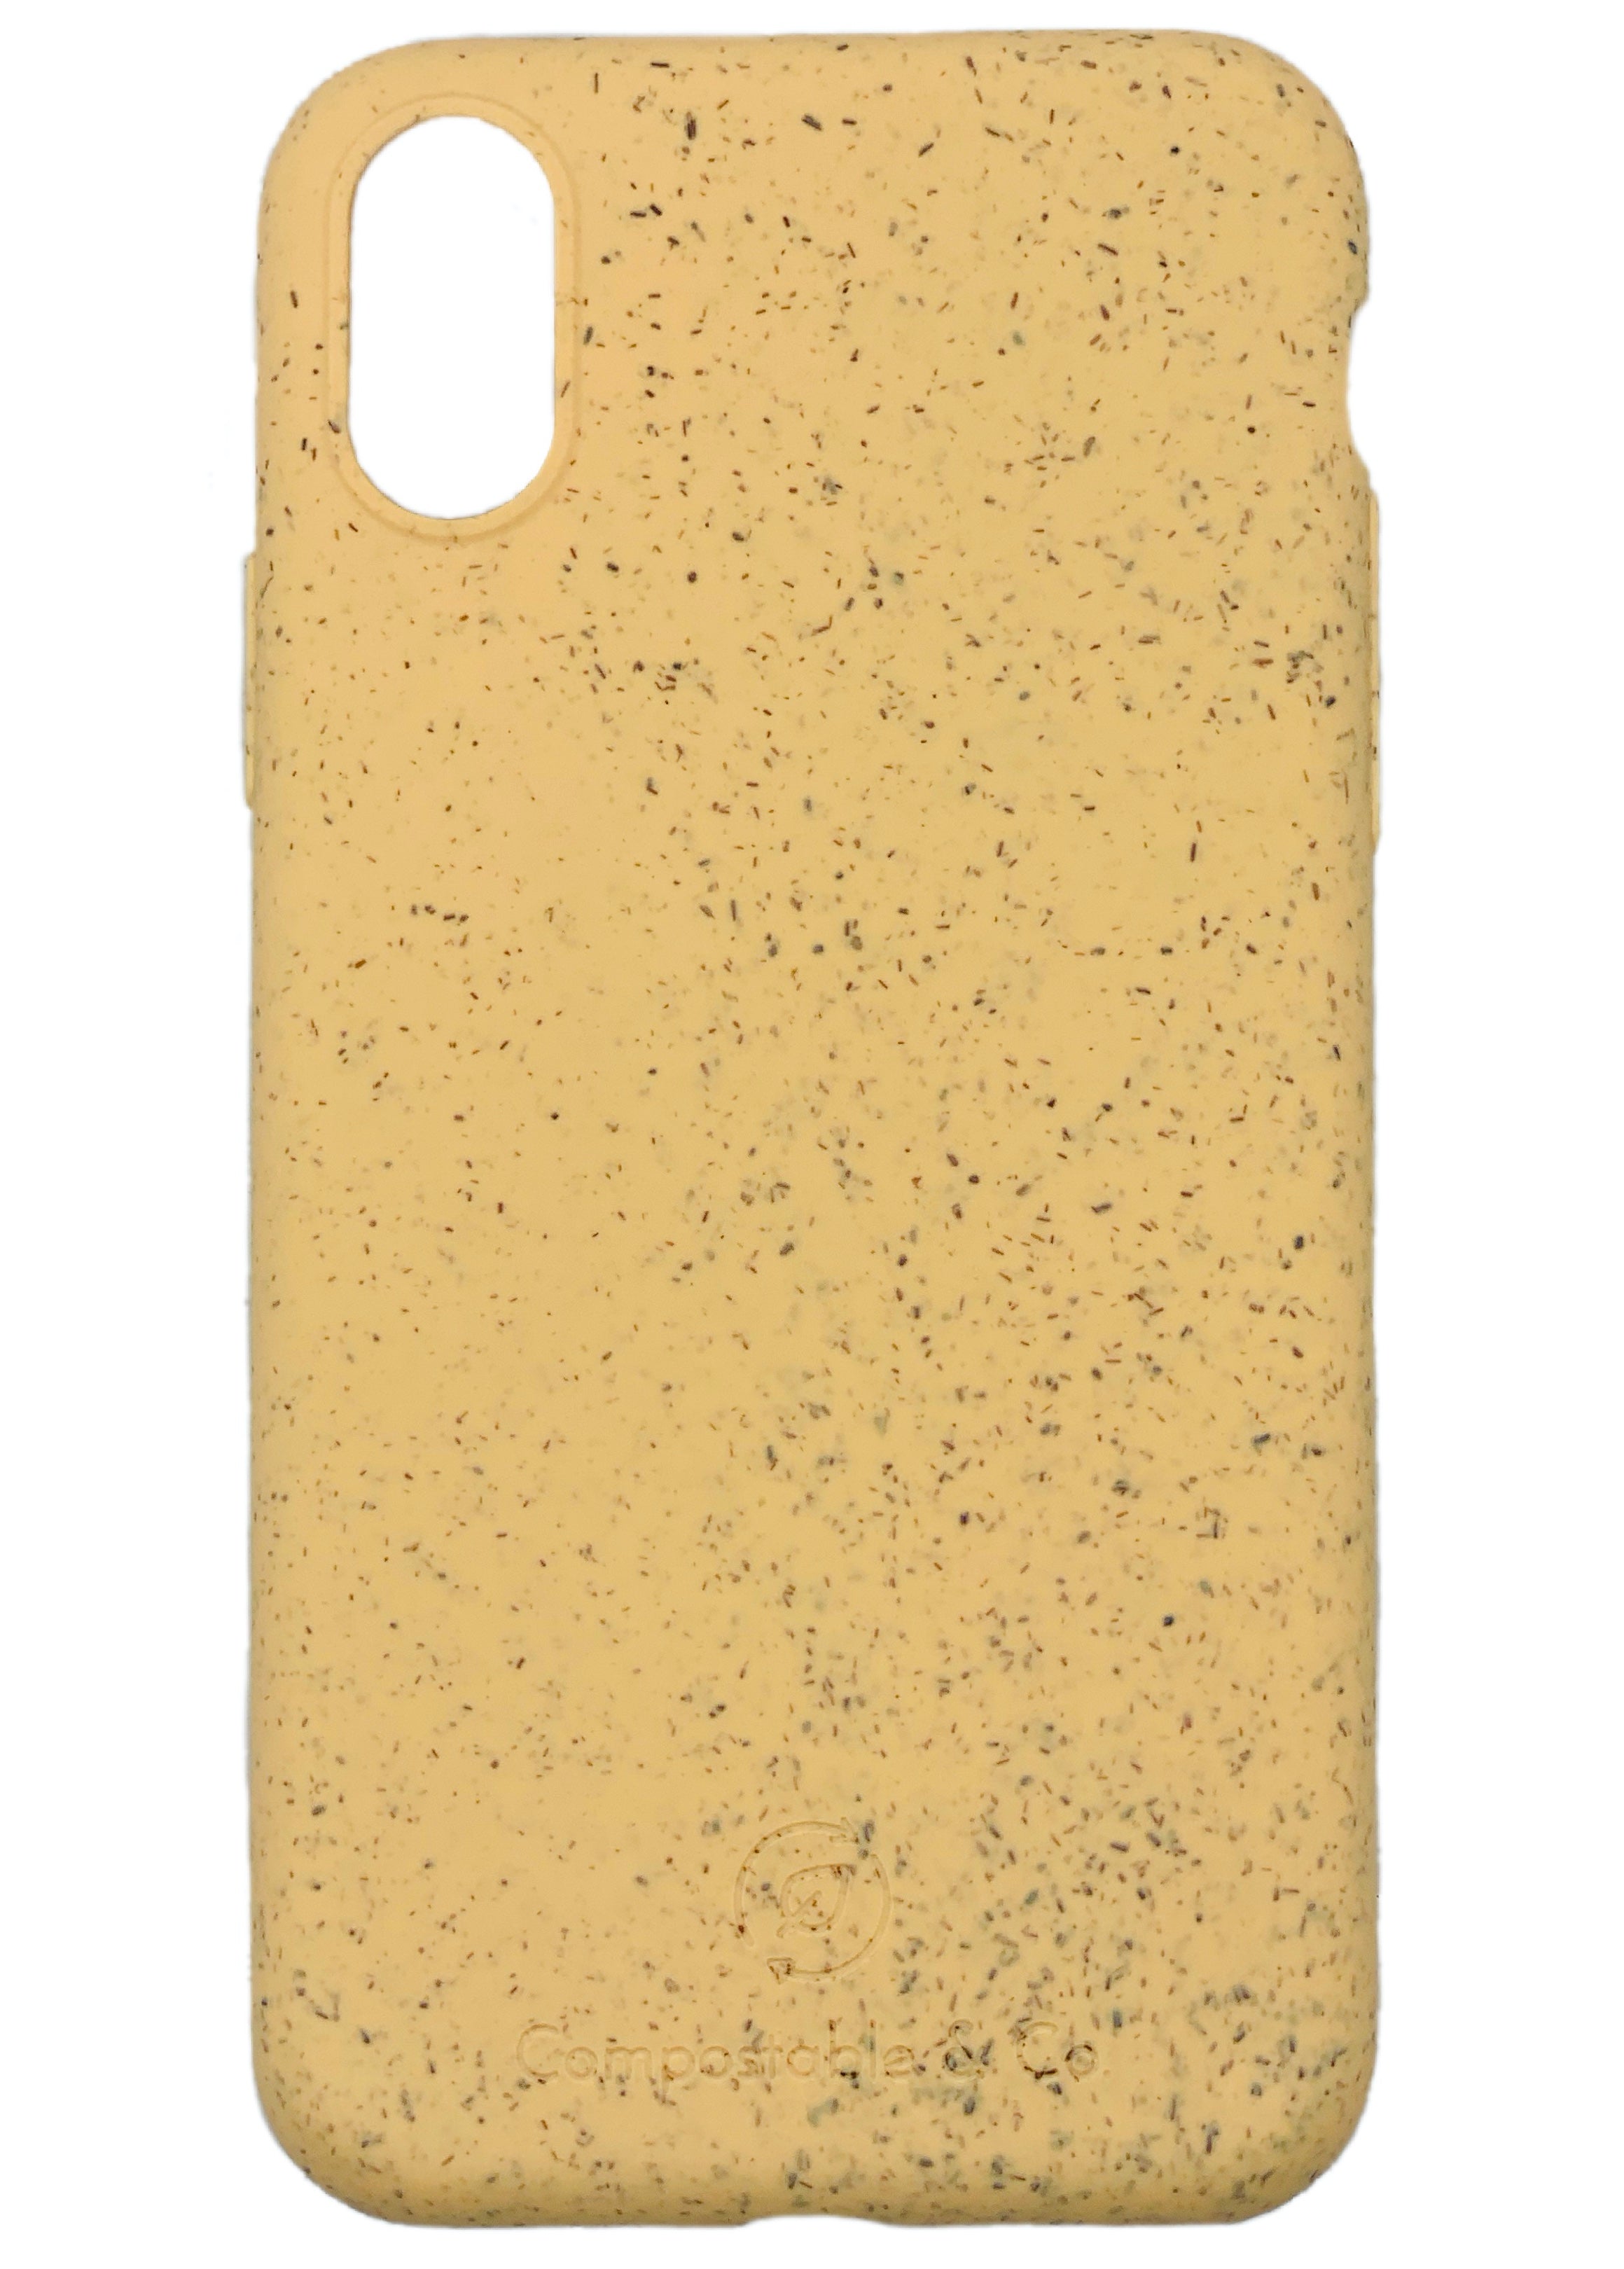 Compostable & Co. iPhone x / xs yellow biodegradable phone case